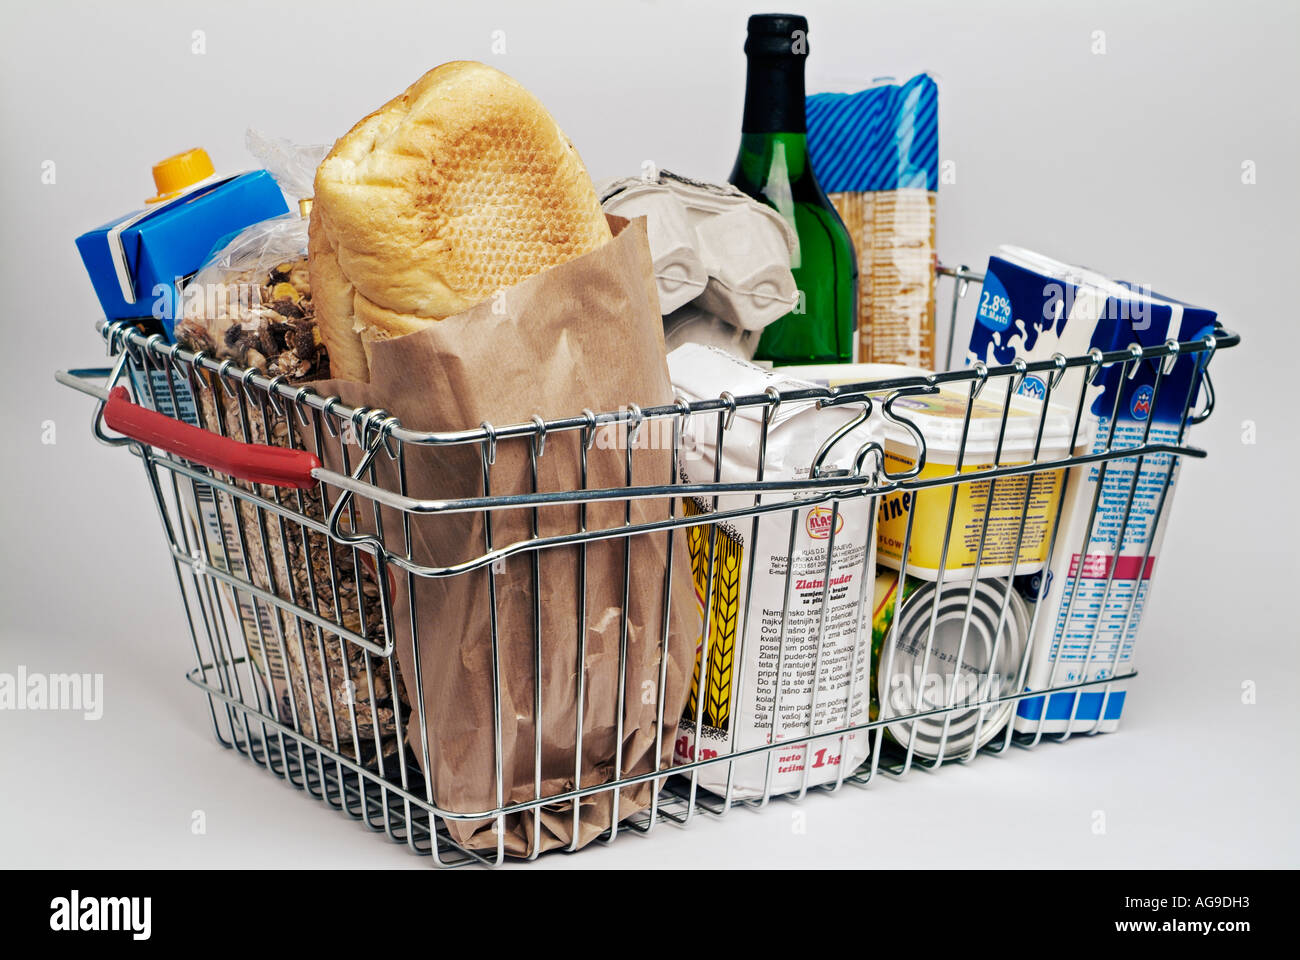 Shopping Basket Full of Groceries Stock Photo - Alamy